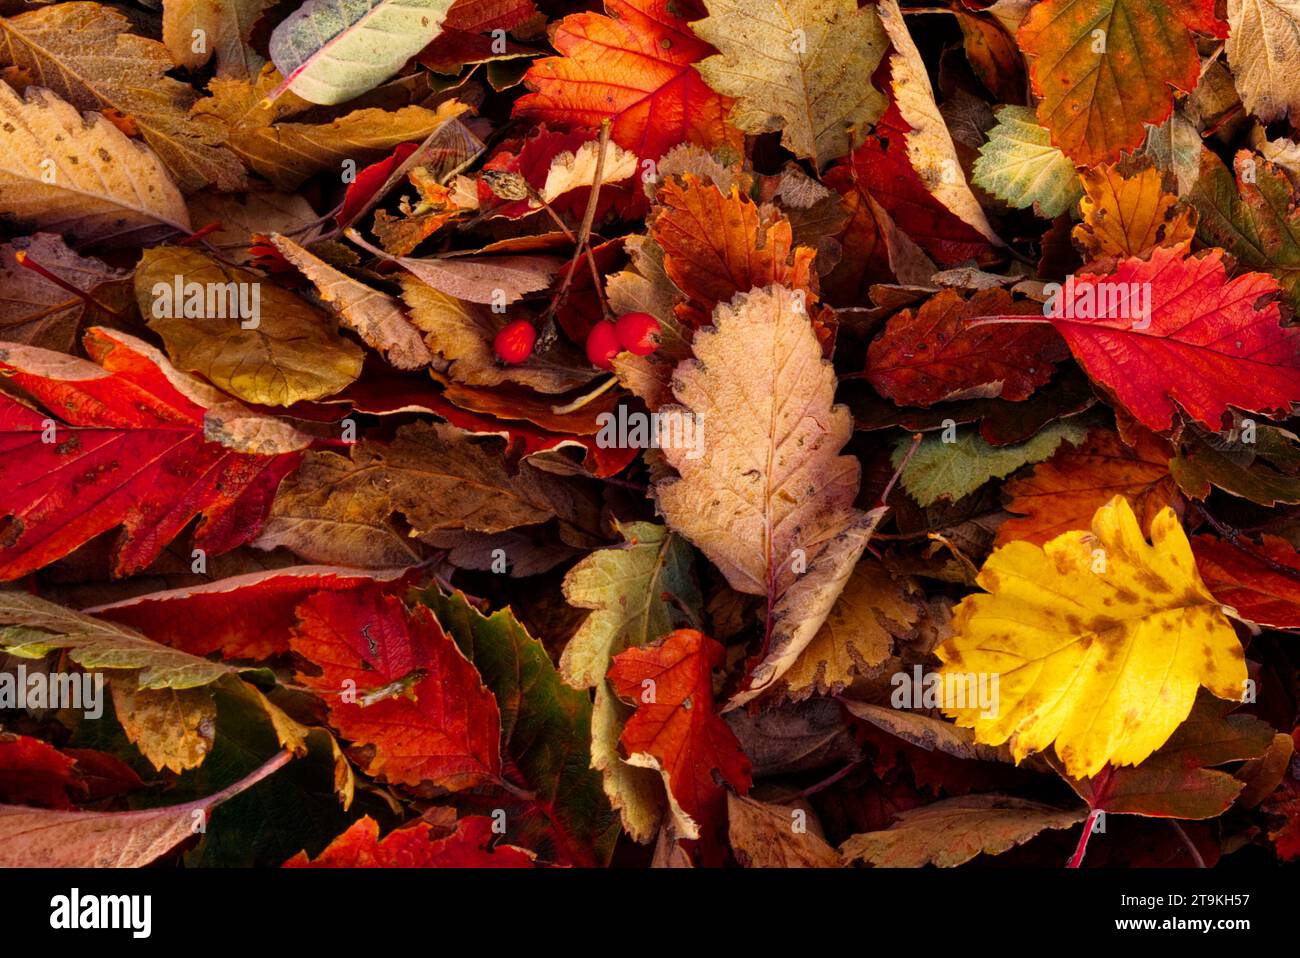 A pile of autumn leaves in various colors with scattered red berries. Stock Photo